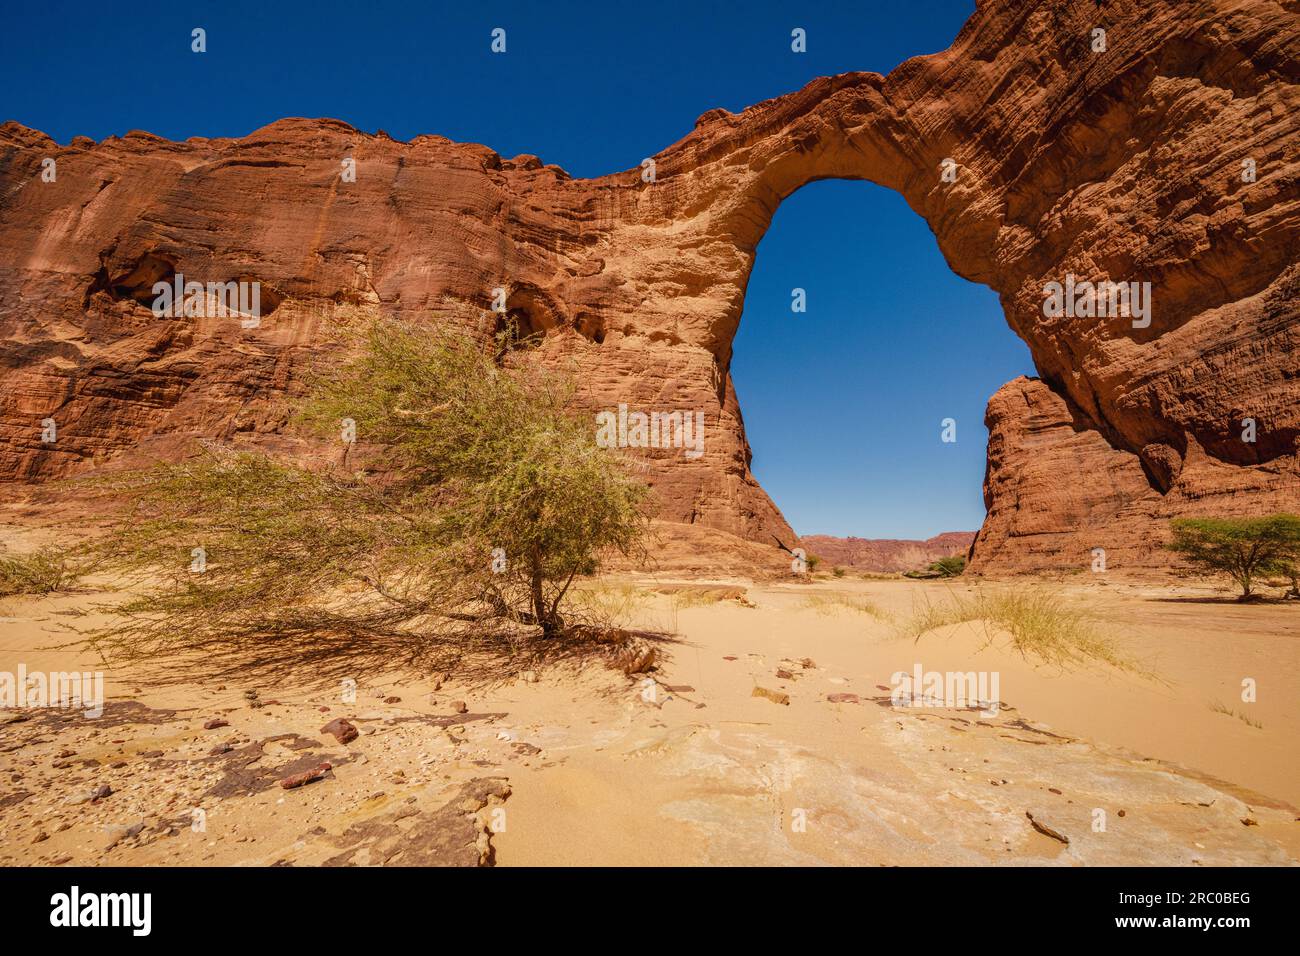 The awe-inspiring Aloba Arch, one of the globe's largest natural arches, stands resolute against the stark desert backdrop of Chad's Sahara Stock Photo